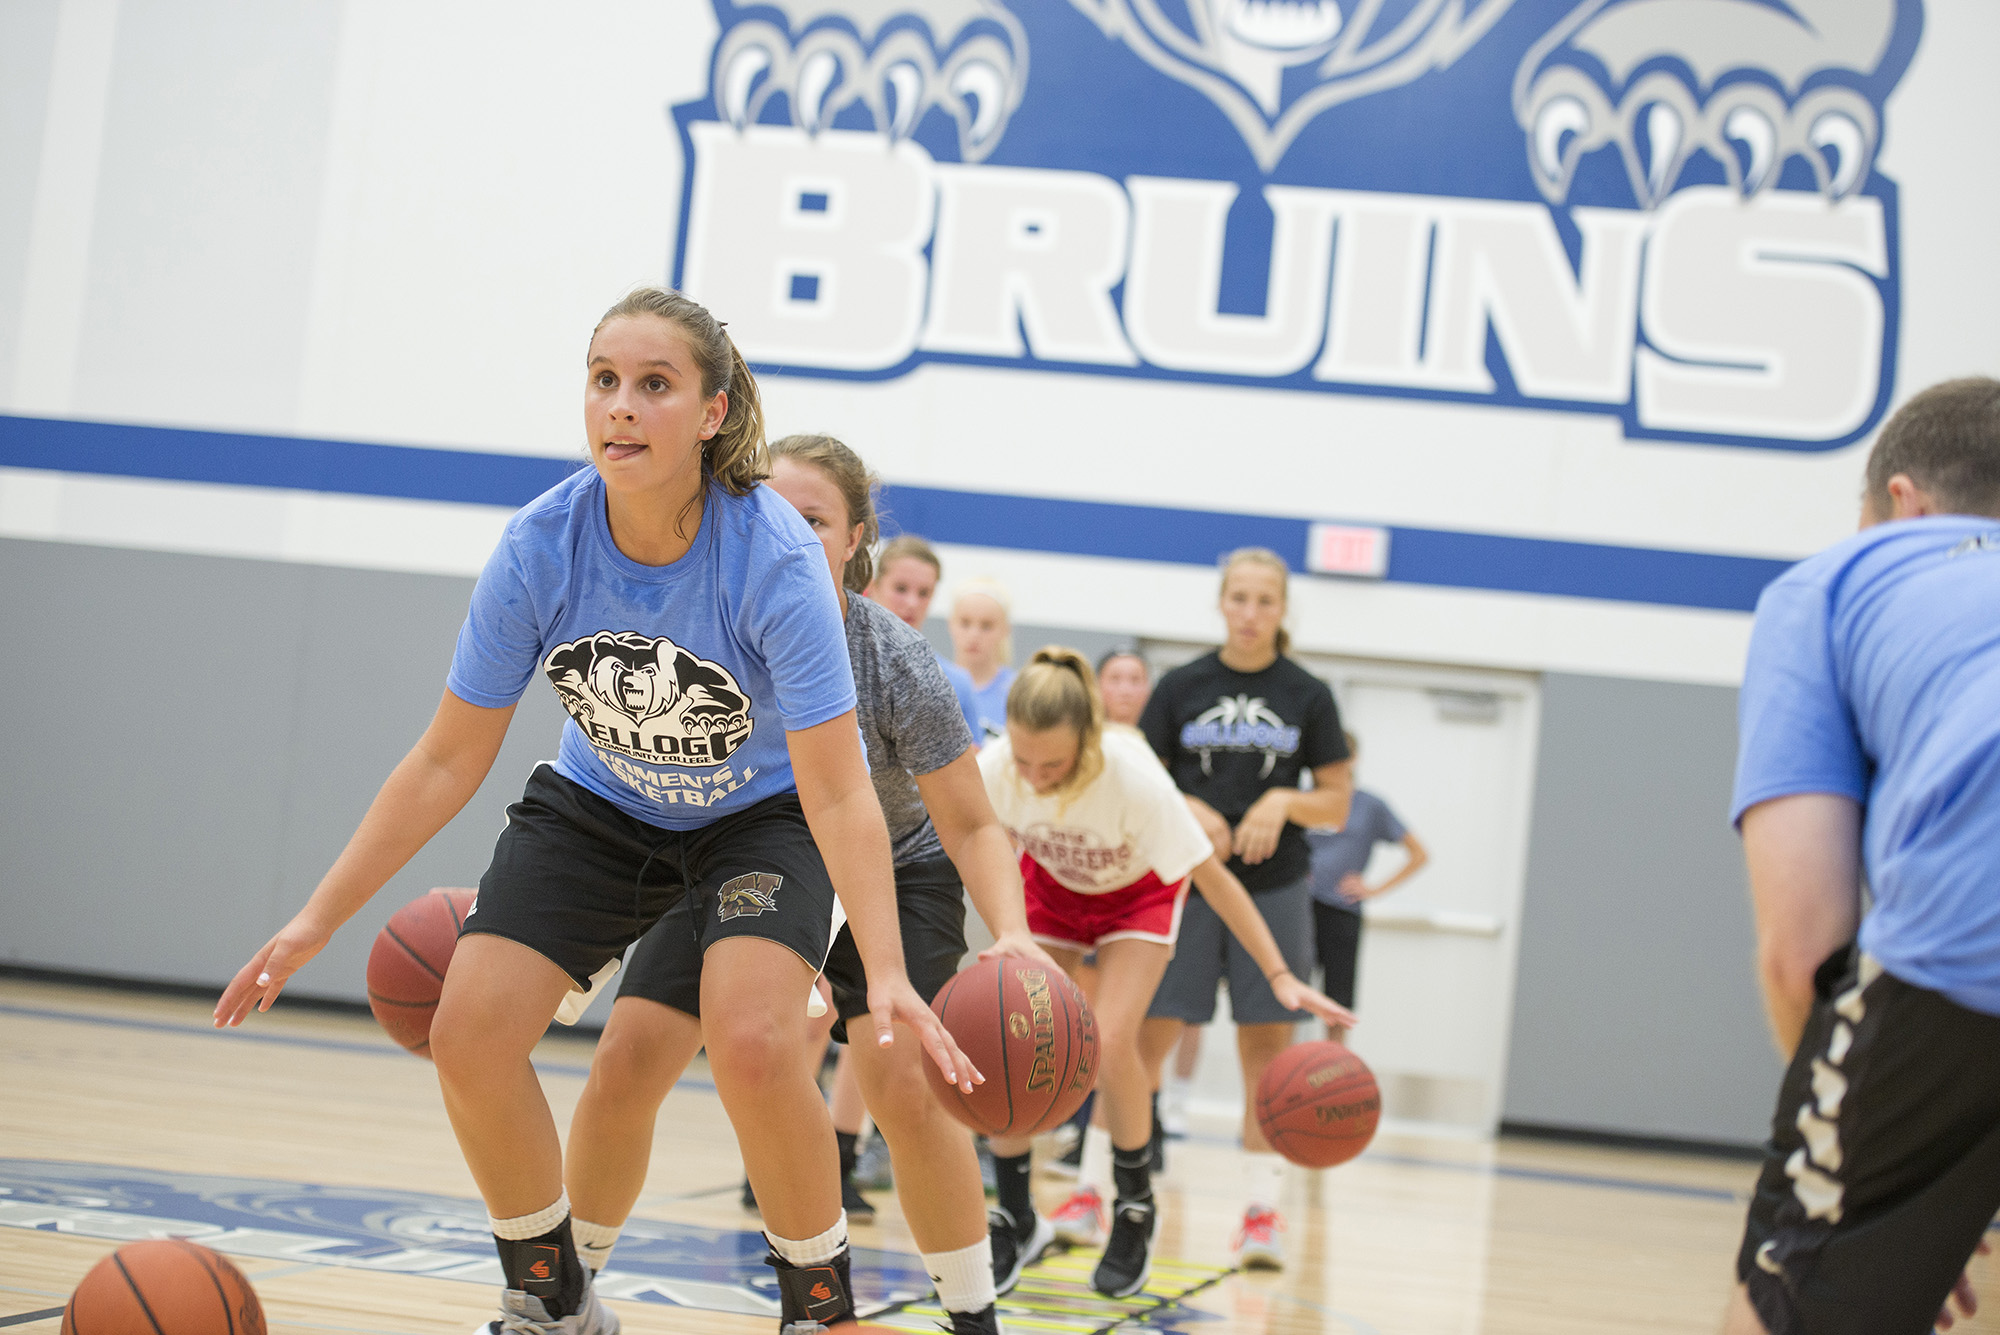 Girls' Basketball Camp is Sept. 23 at KCC’s new Miller Gym KCC Daily